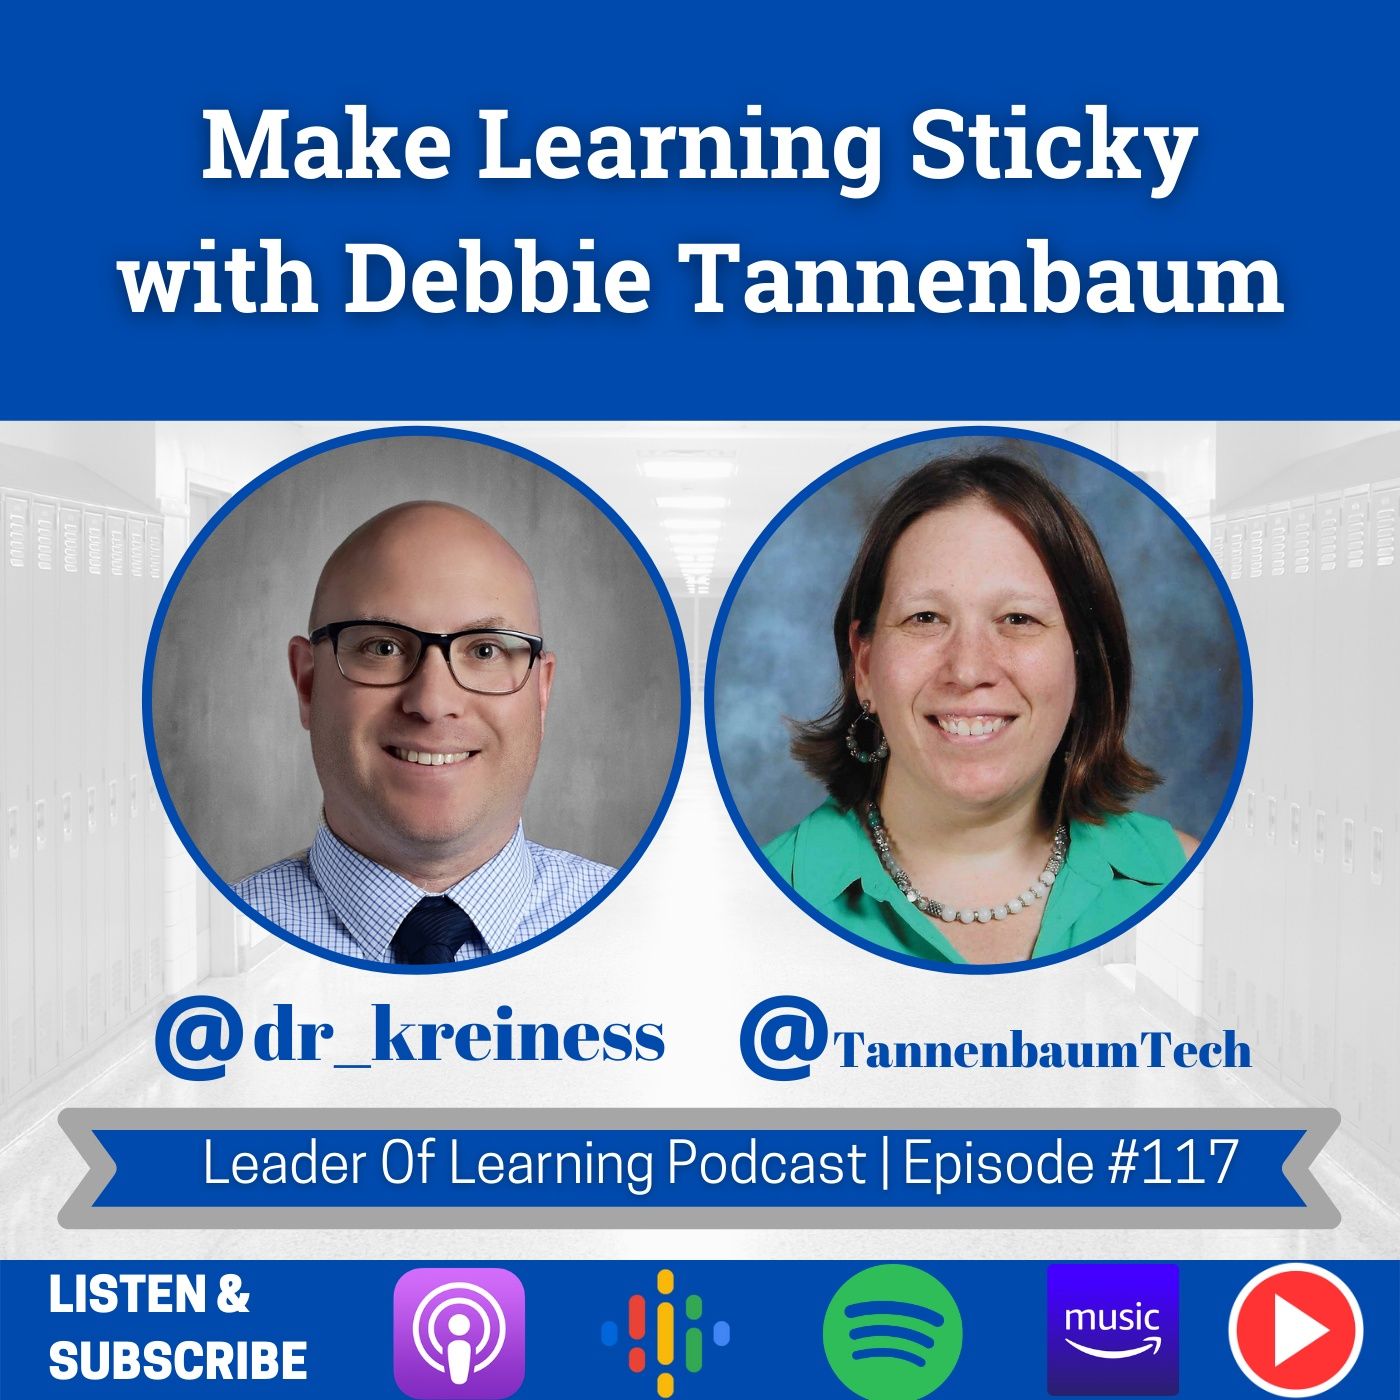 Make Learning Sticky with Debbie Tannenbaum Image